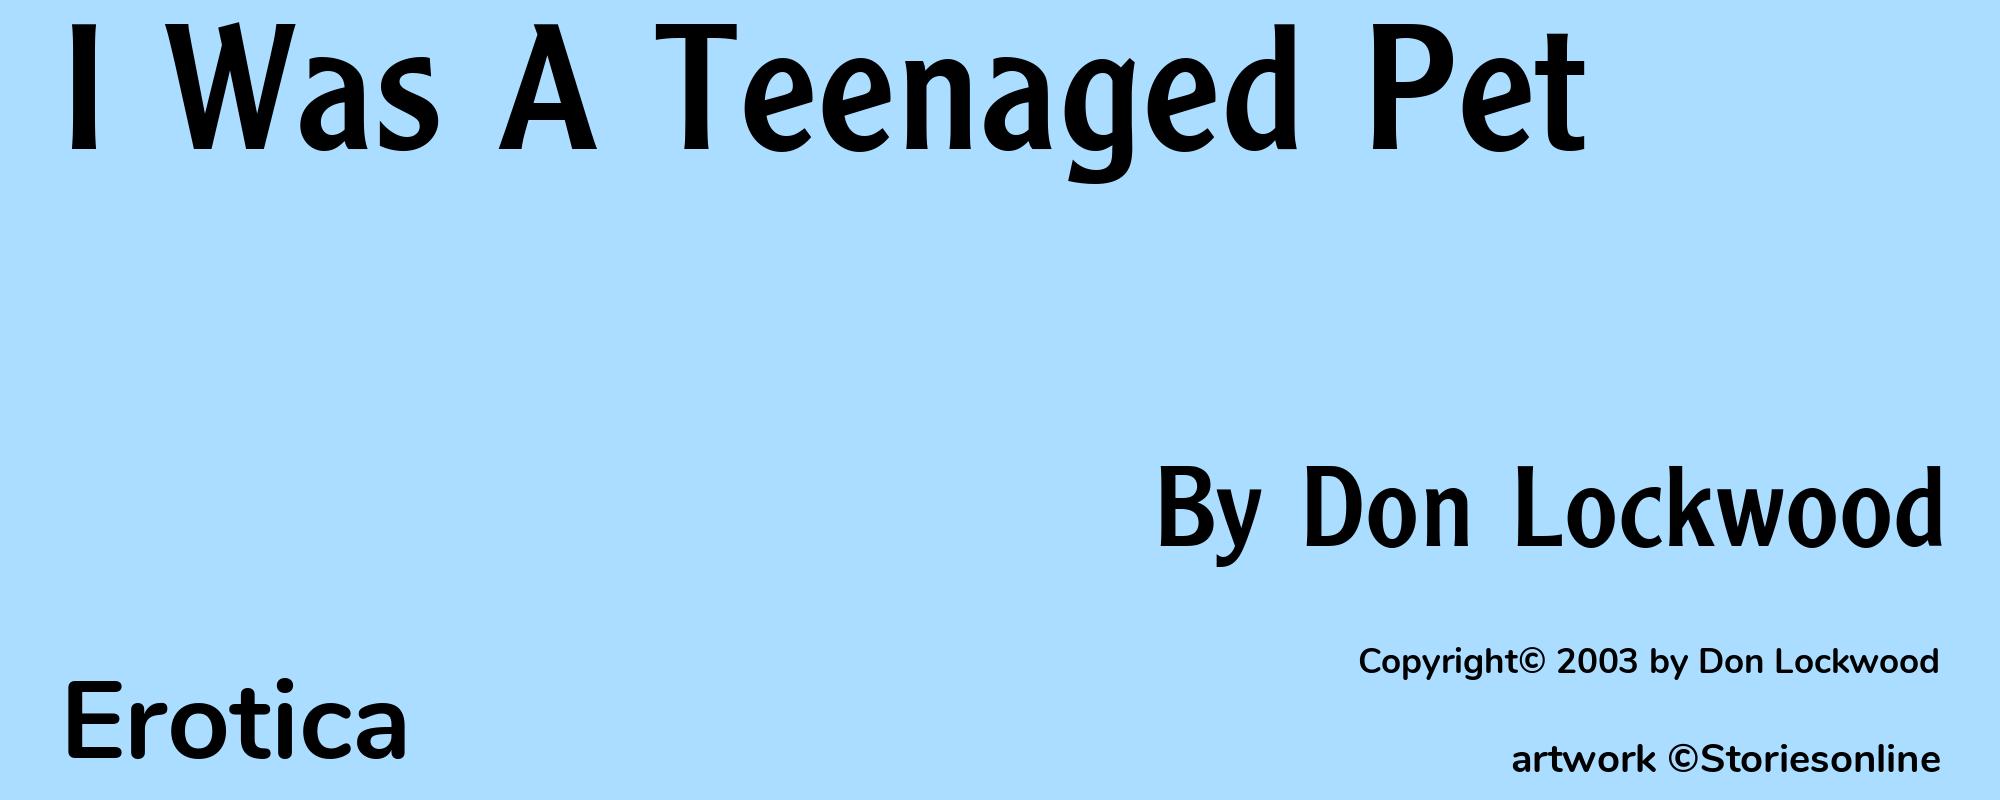 I Was A Teenaged Pet - Cover